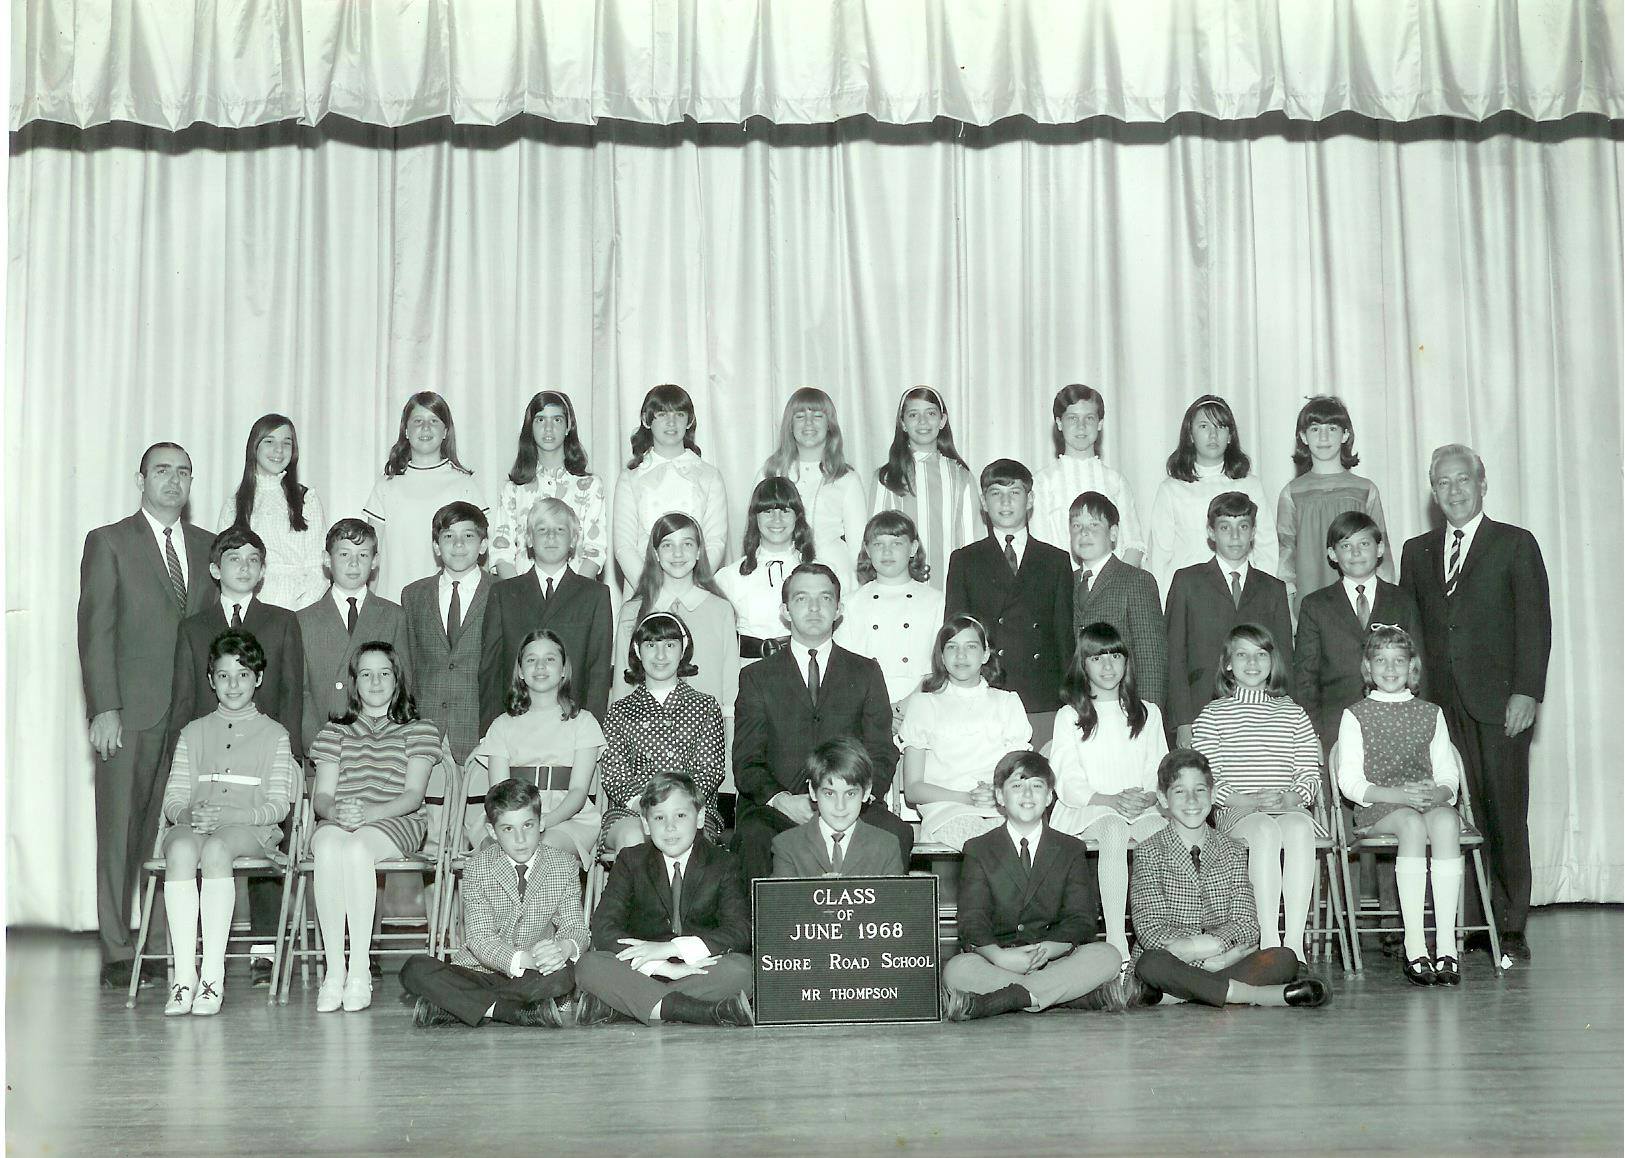 Gershon Baskin (sitting in front row, second from right) in his 6th Grade photo at the Shore Road Elementary Bellmore, LI (South Shore). His teacher is Gerald Thompson.